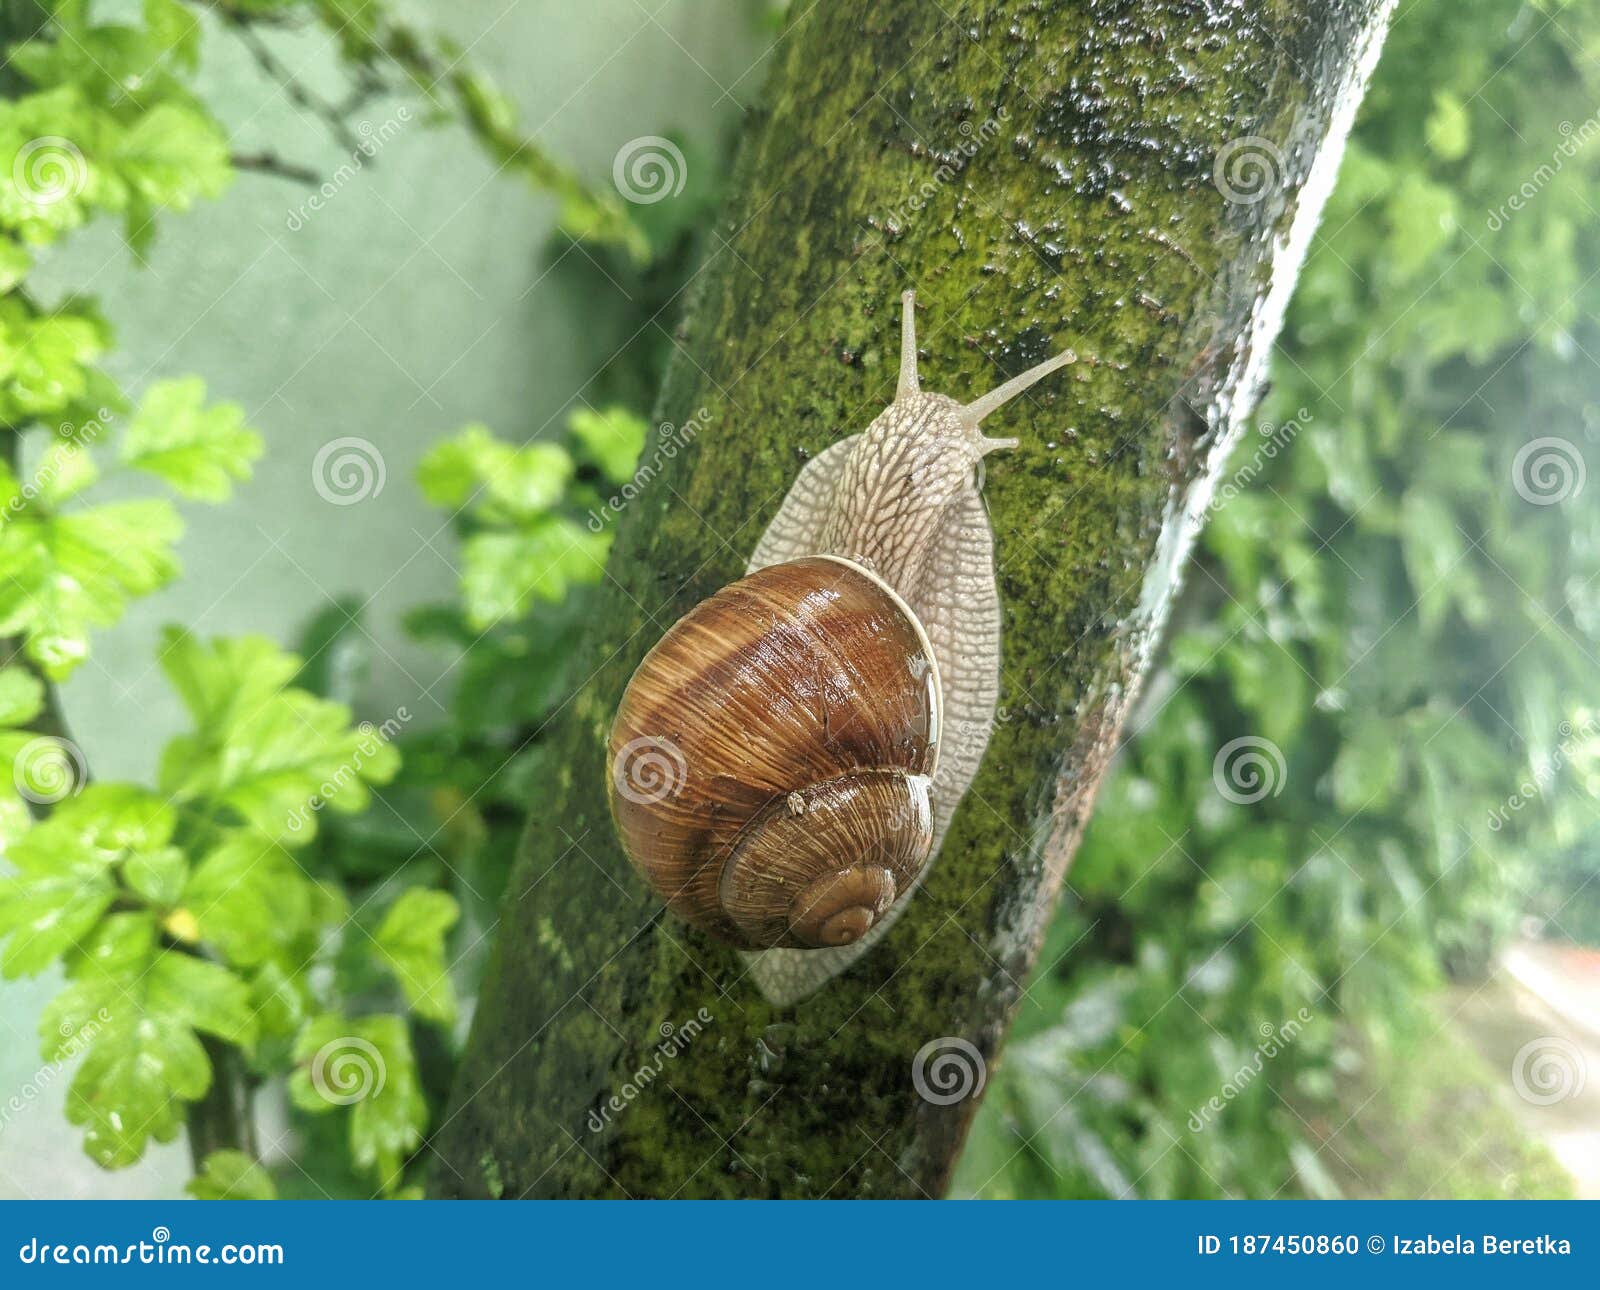 snail with house creeping on tree bole in the garden in the rainy day